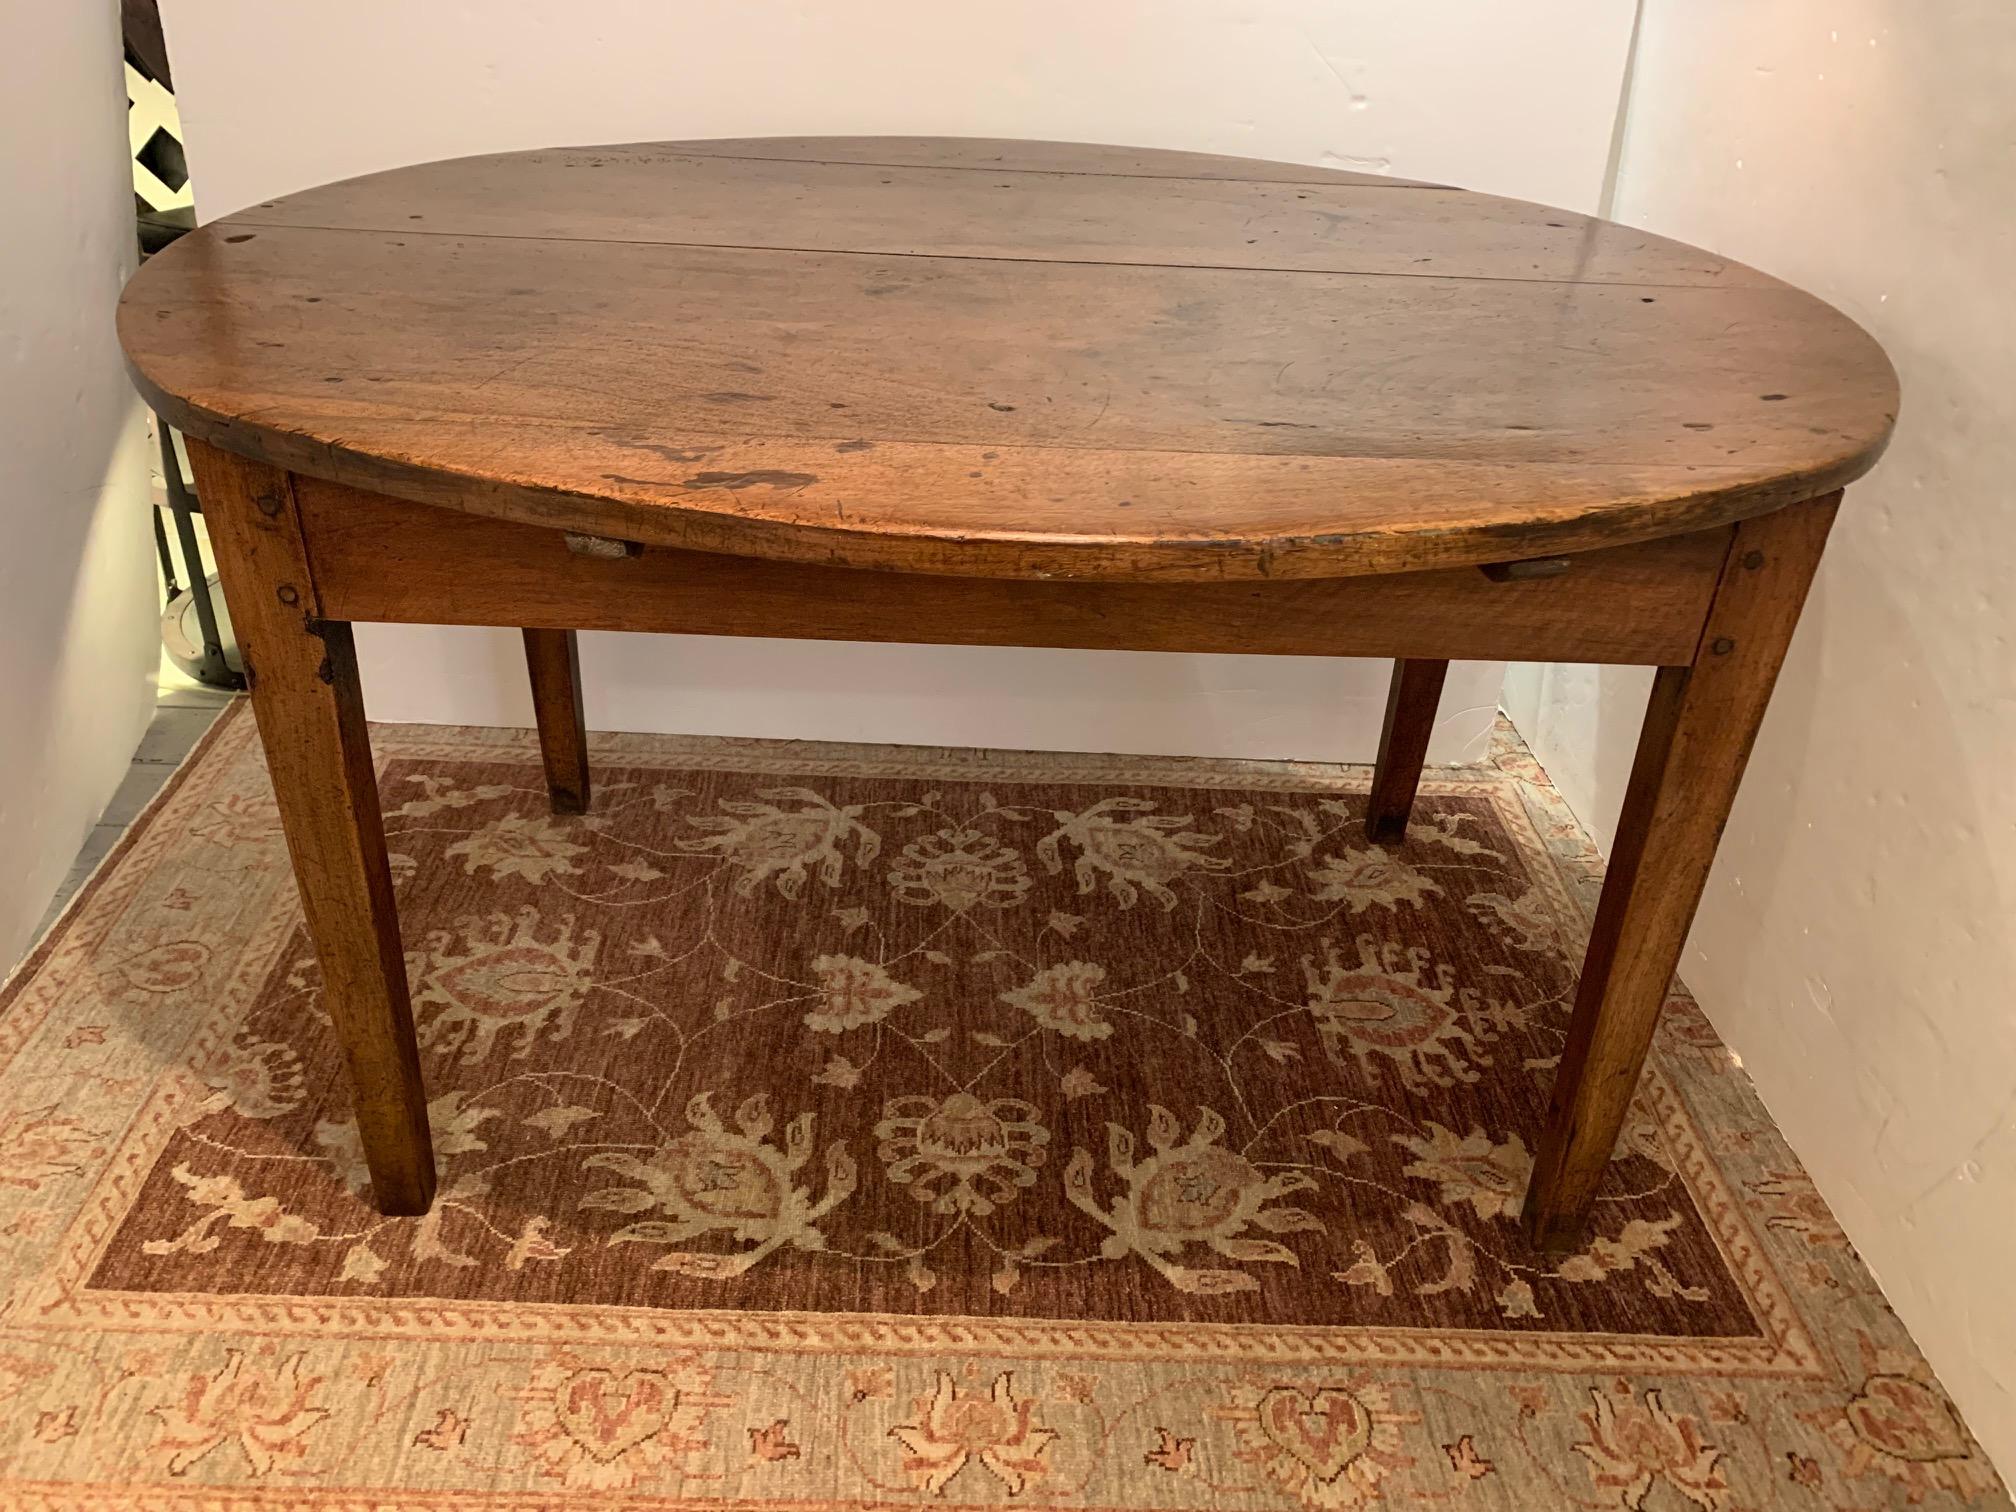 If tables could talk, this well loved gorgeous oval antique tavern table would have some great tales. The warm patina and obvious hand hewn craftsmanship with wooden pegs will give soul to any room. Perfect as a small dining table or breakfast